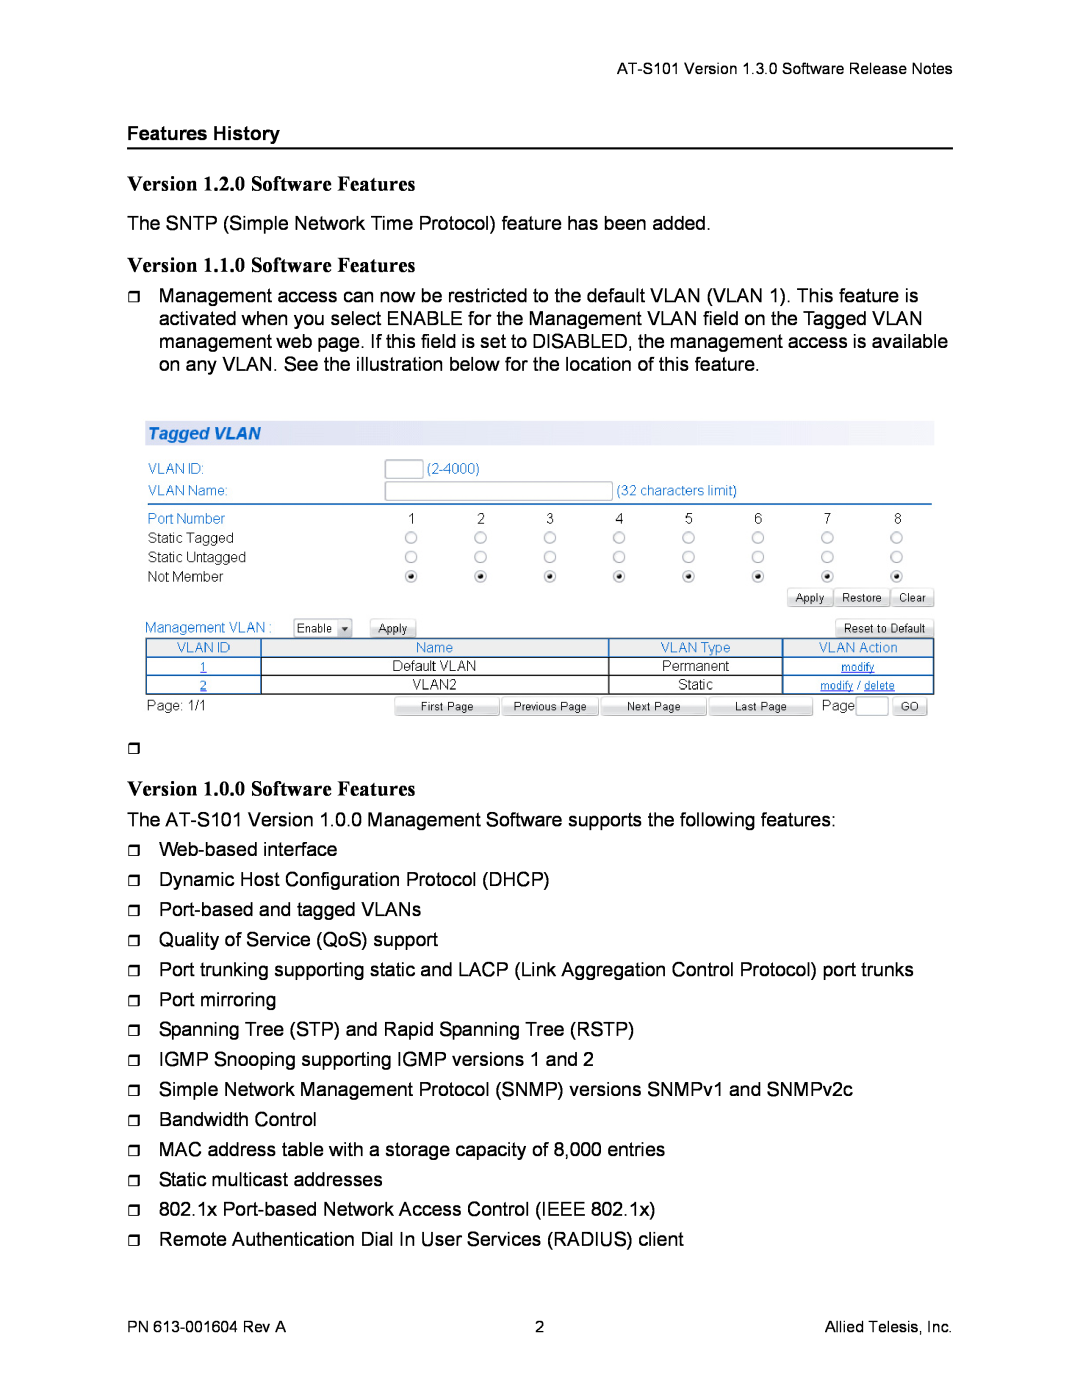 Allied Telesis AT-S101 Version 1.2.0 Software Features, Version 1.1.0 Software Features, Version 1.0.0 Software Features 